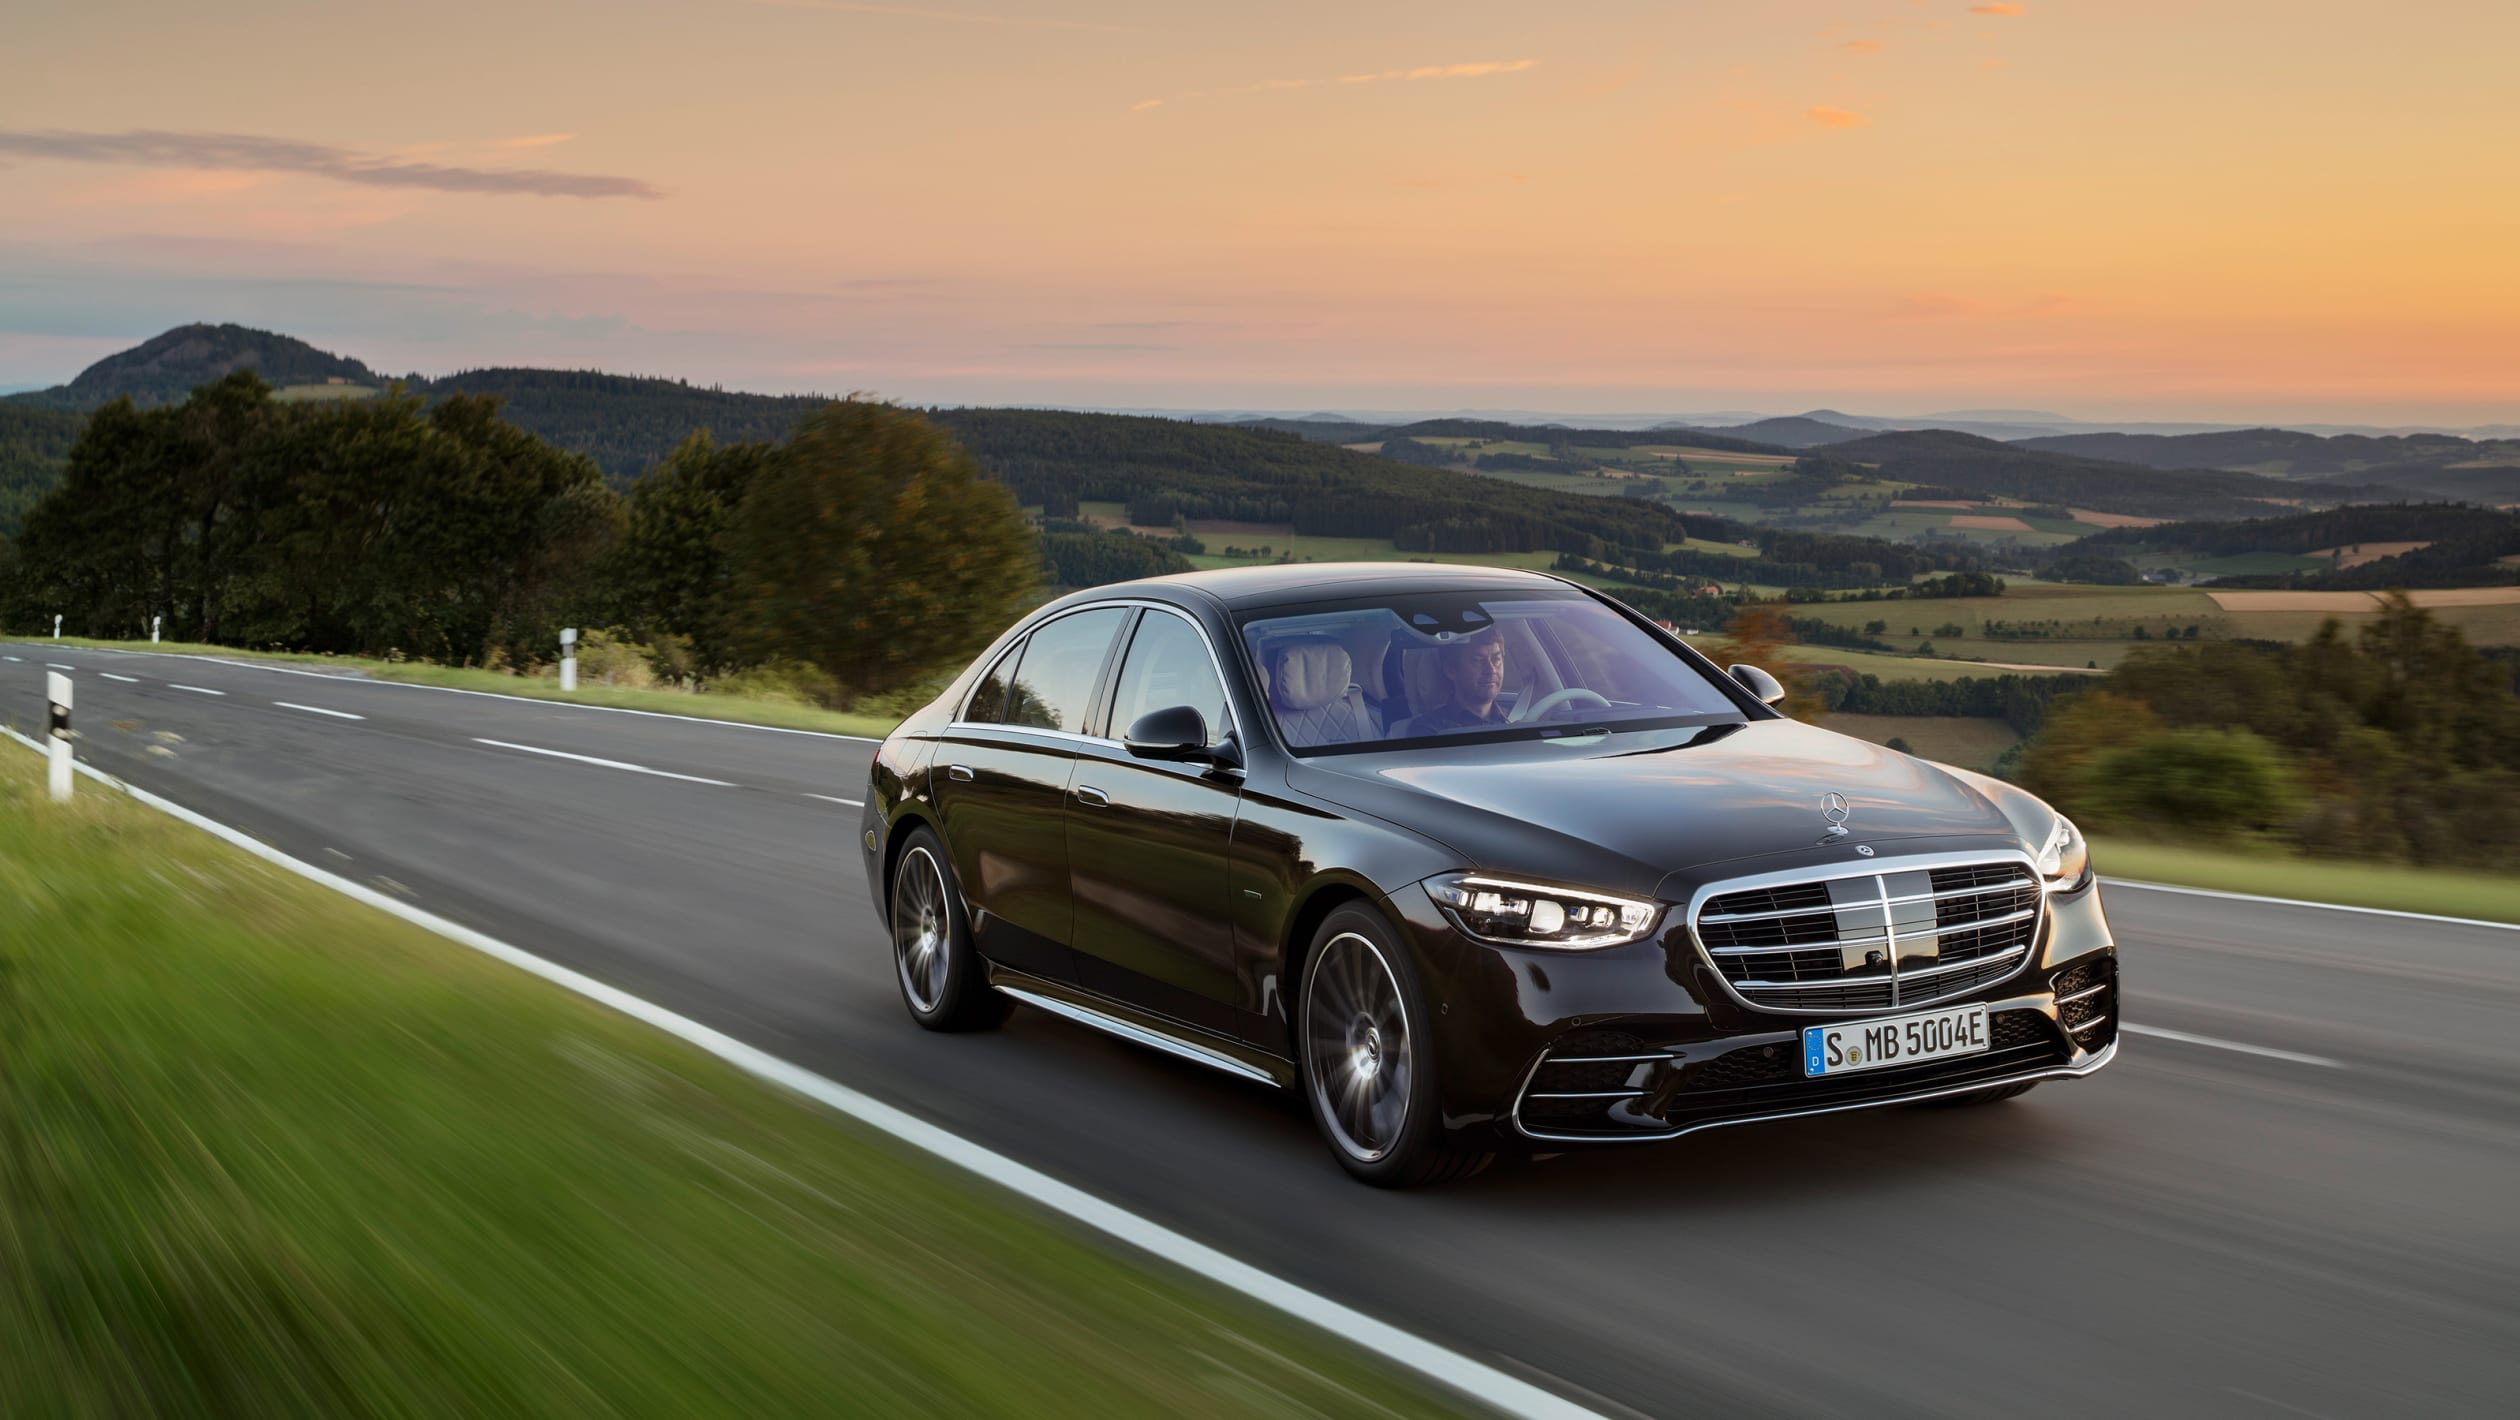 Black S Class car driving on a scenic road with natural landscape in the background. Our luxury chauffeur service provides comfortable and stylish transportation with breathtaking views.